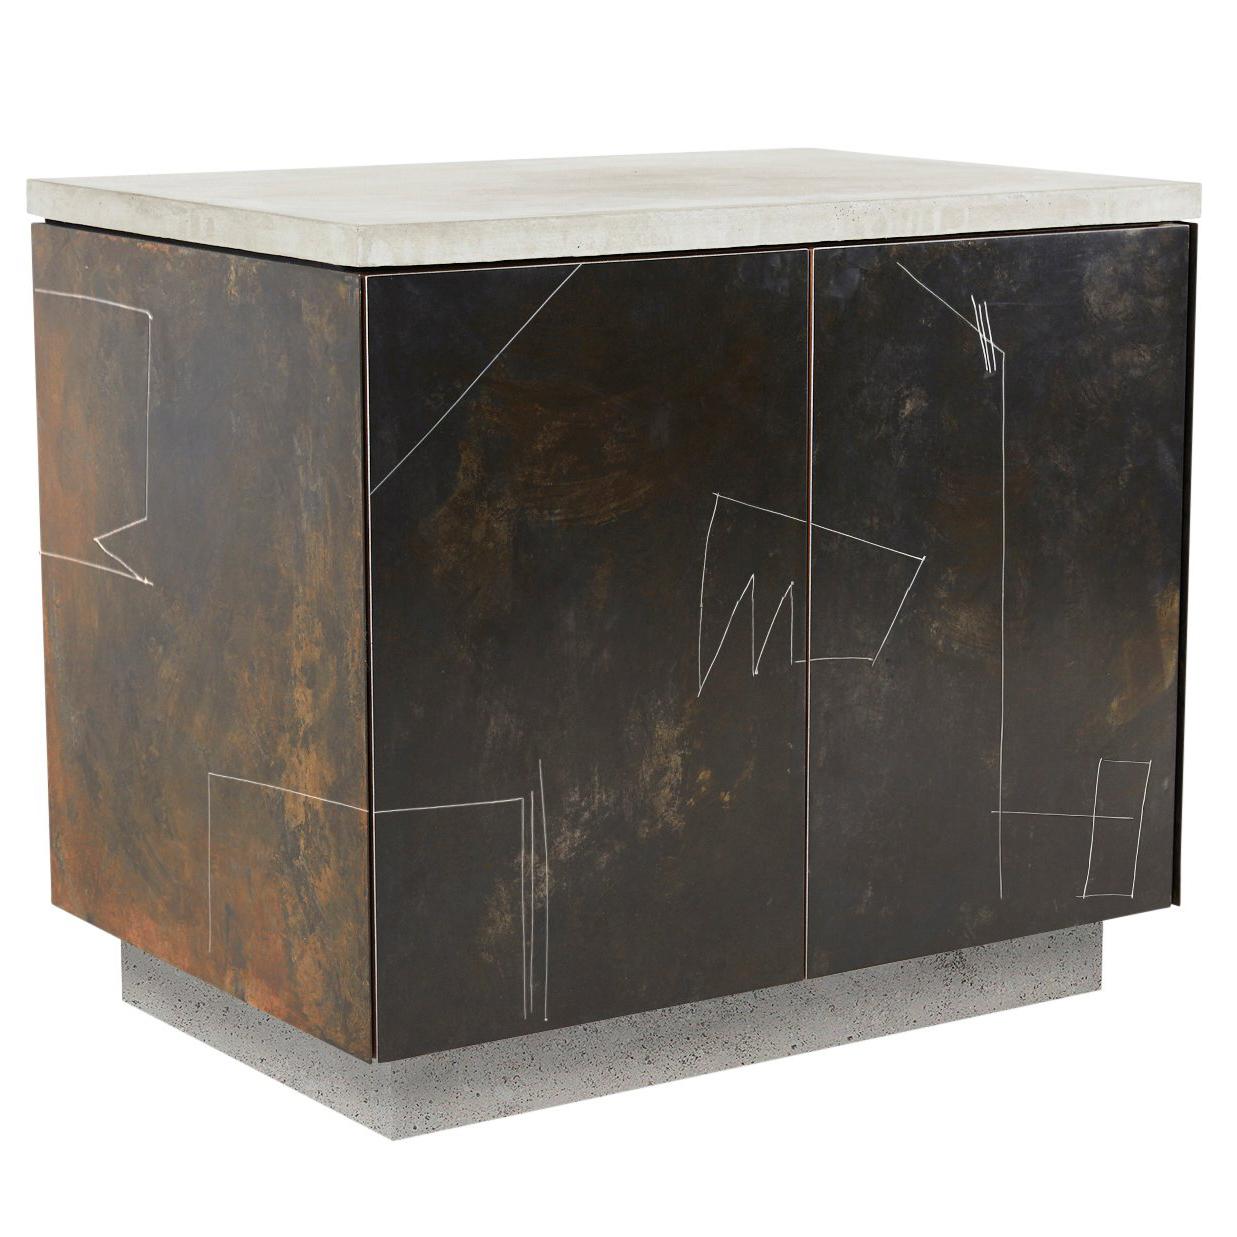 S.O. Side Table Cabinet with Drawn Faces in Walnut, Steel and Concrete